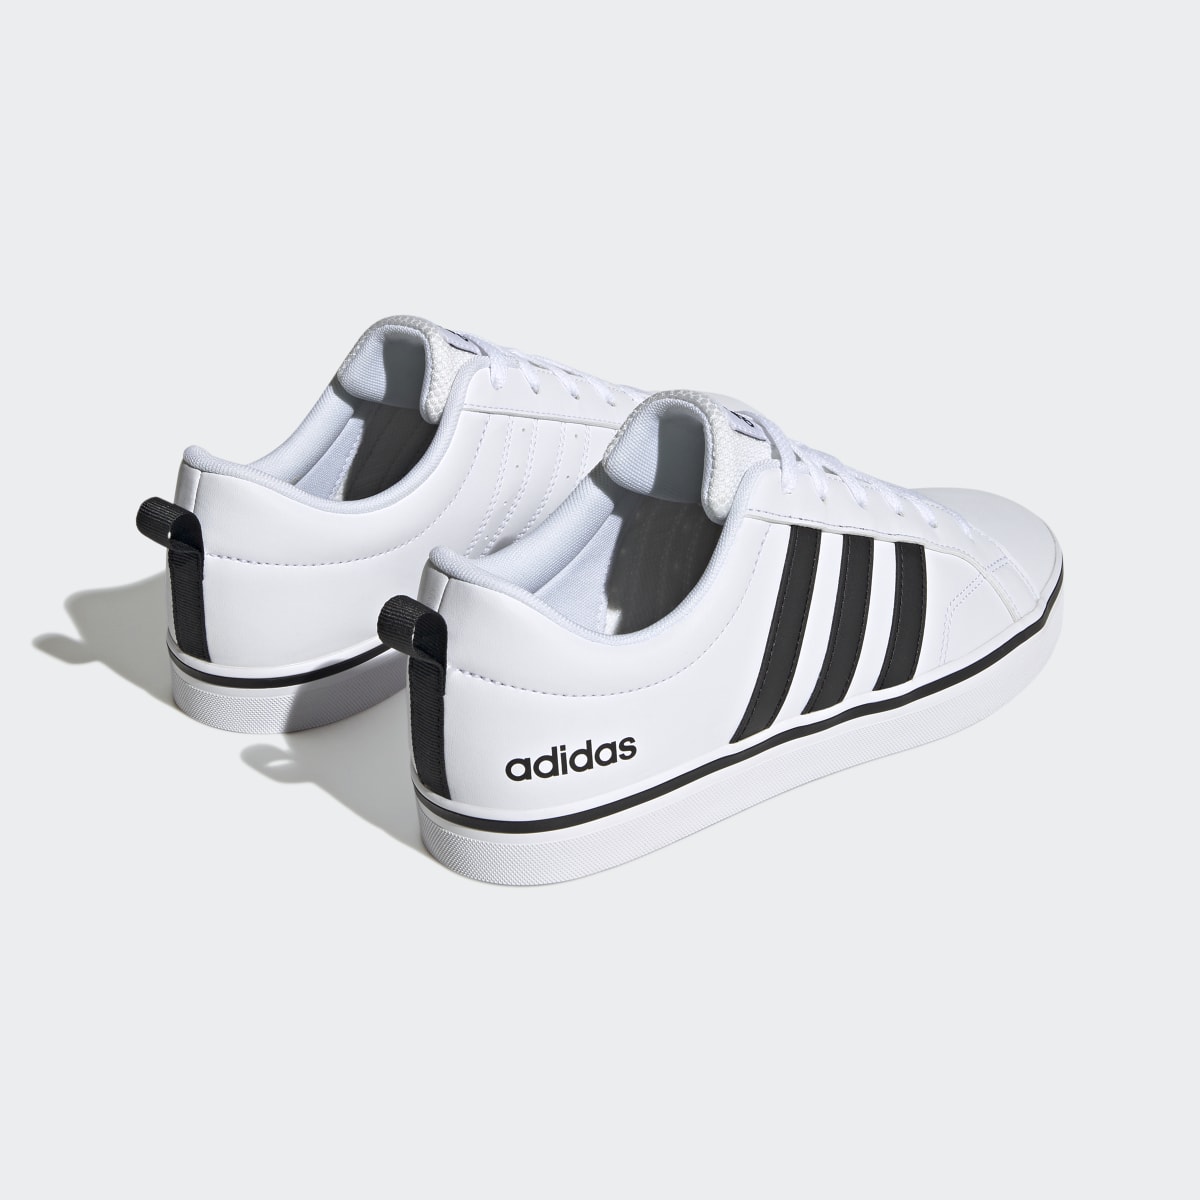 Adidas VS Pace 2.0 Schuh. 6